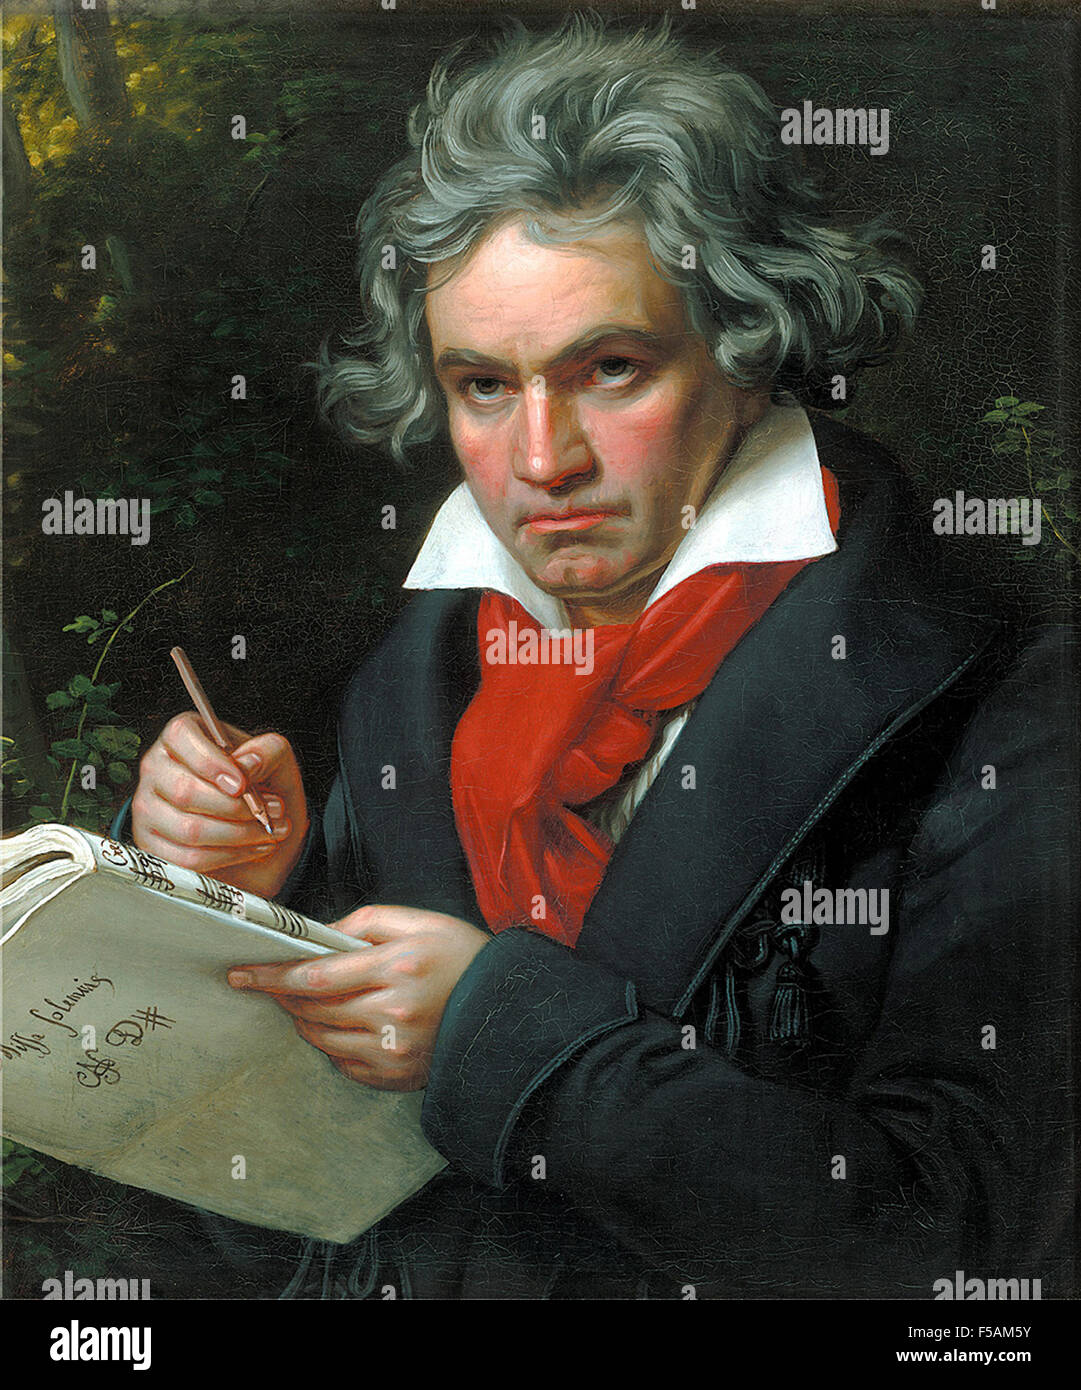 LUDWIG van BEETHOVEN (1770-1827) German composer as painted by Joseph Stieler in 1820 Stock Photo